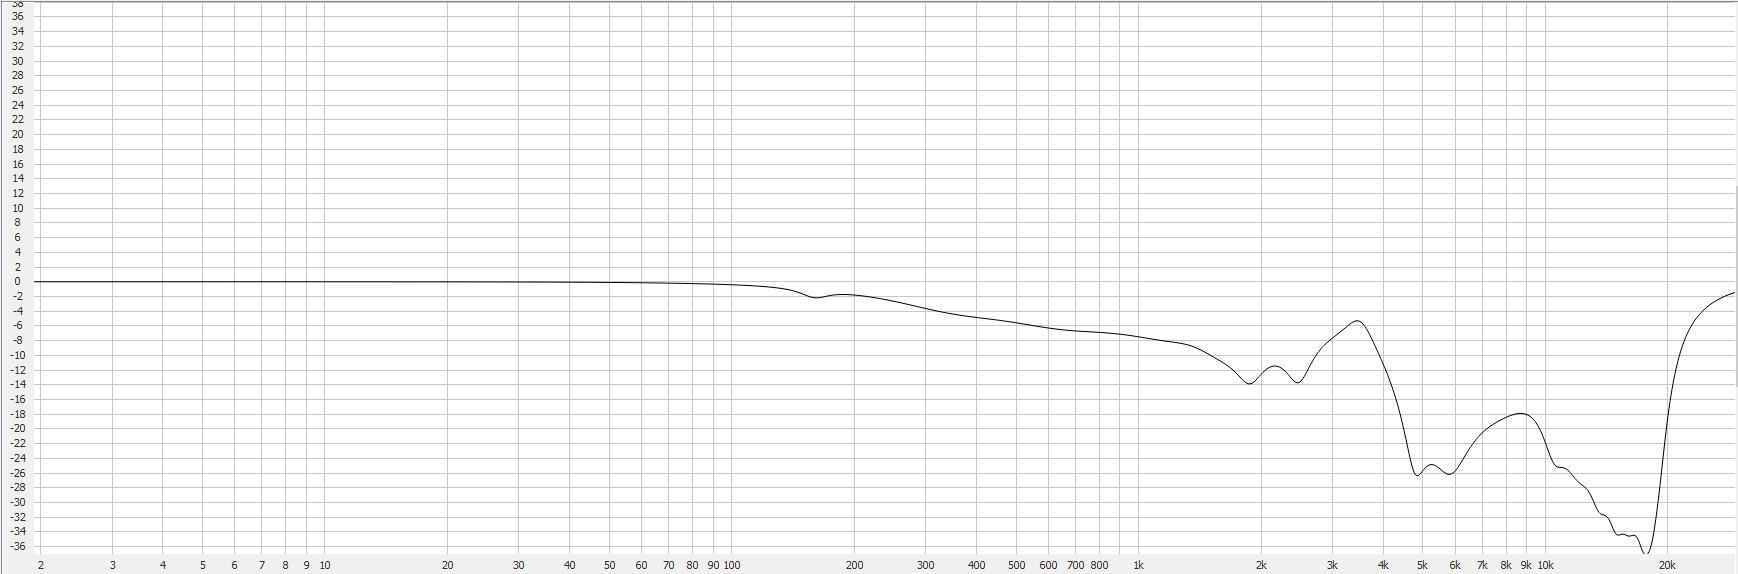 SHP9500S_-10dB Slope Curve.PNG